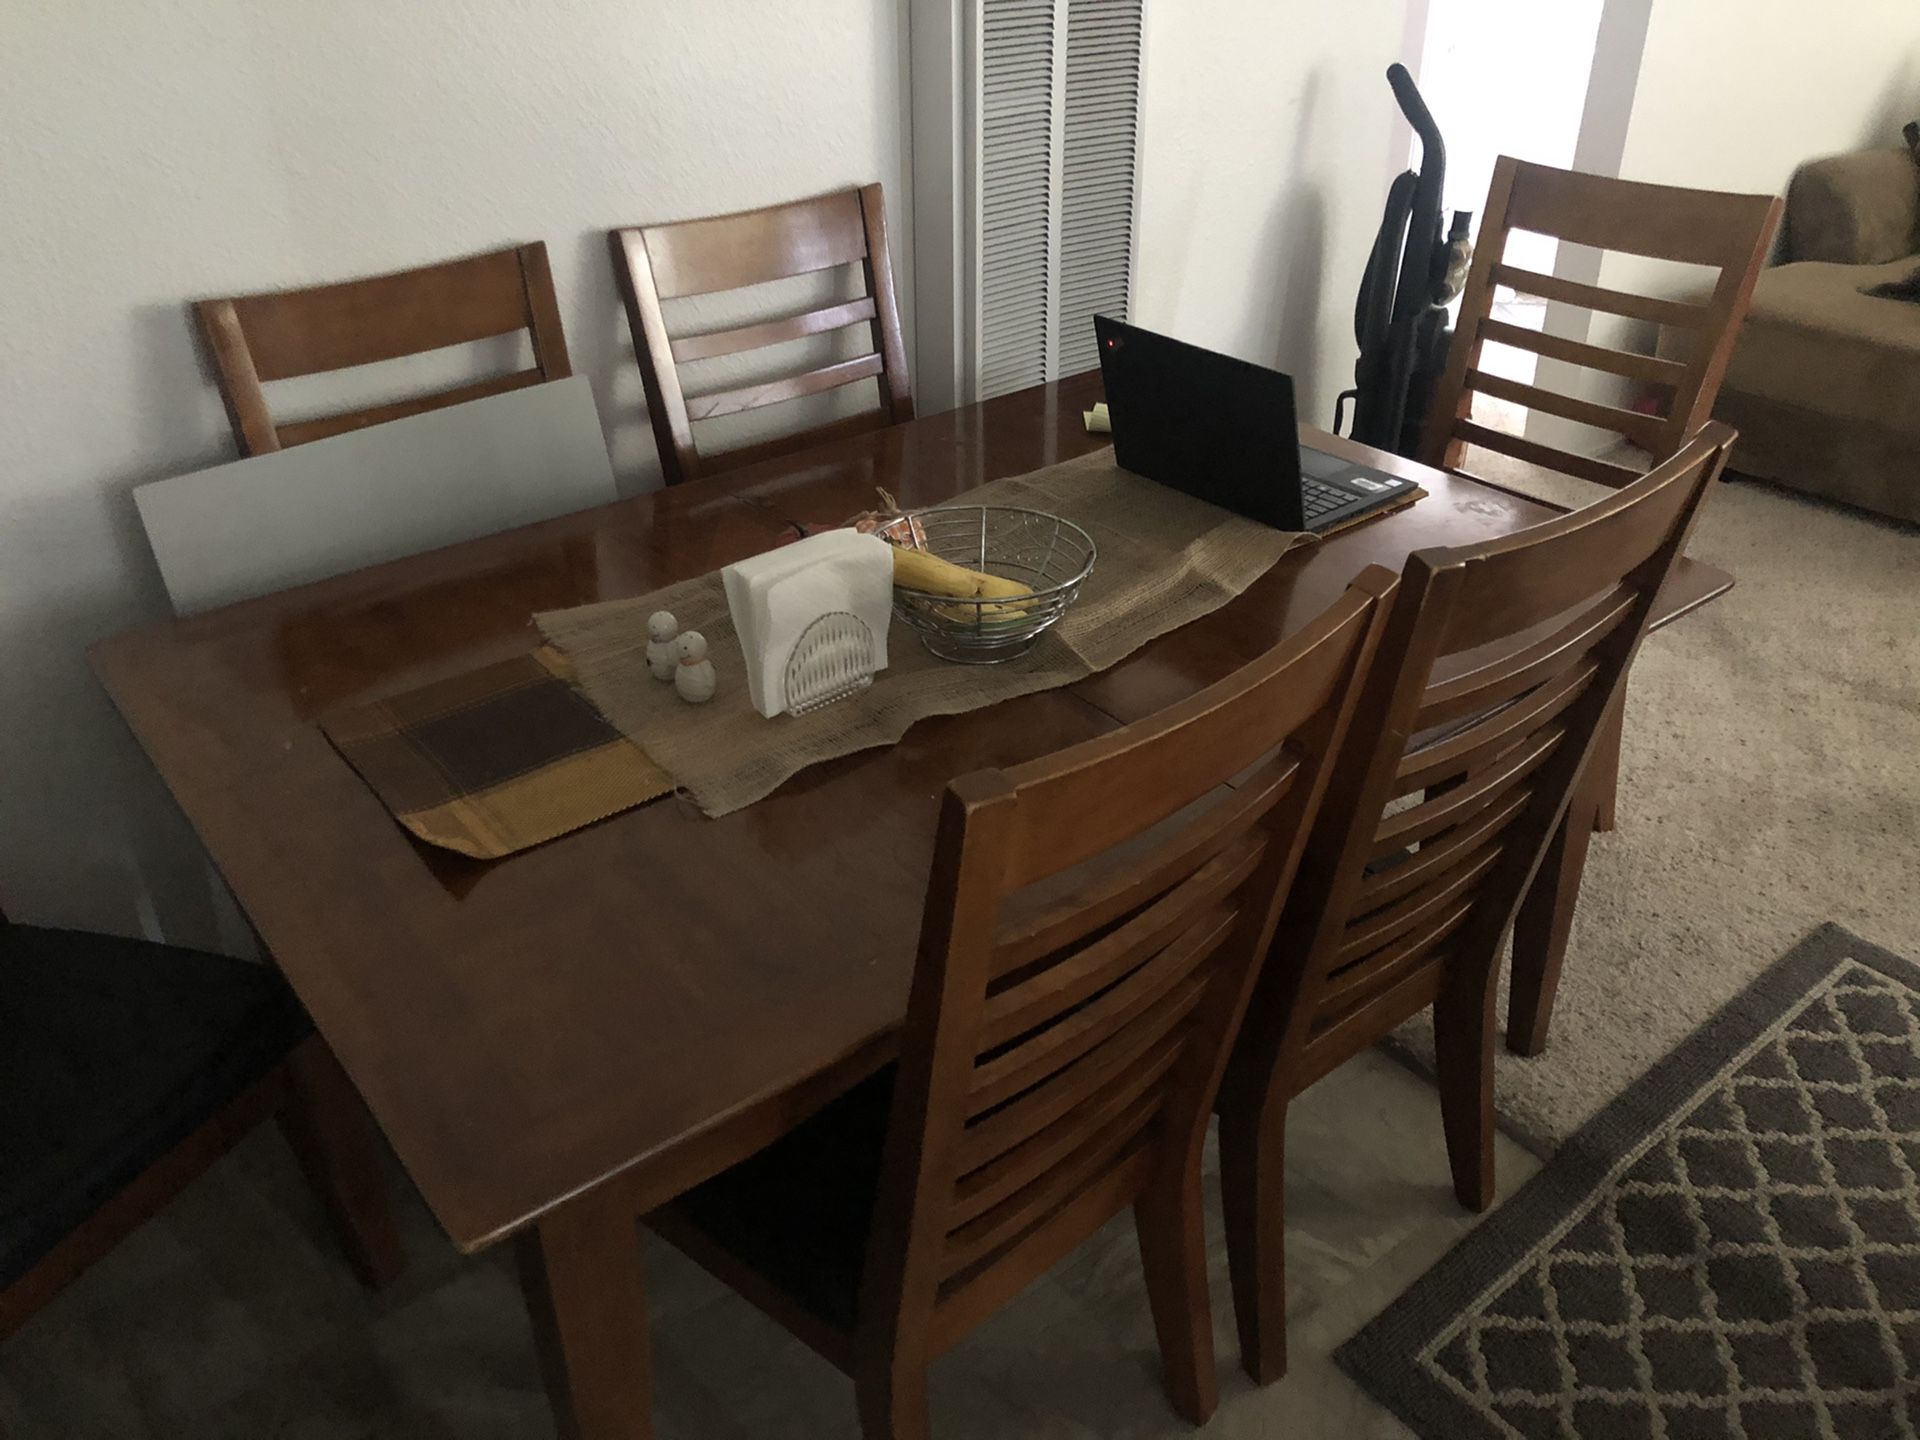 Dining Room table, small table and T.V. For sale as a set